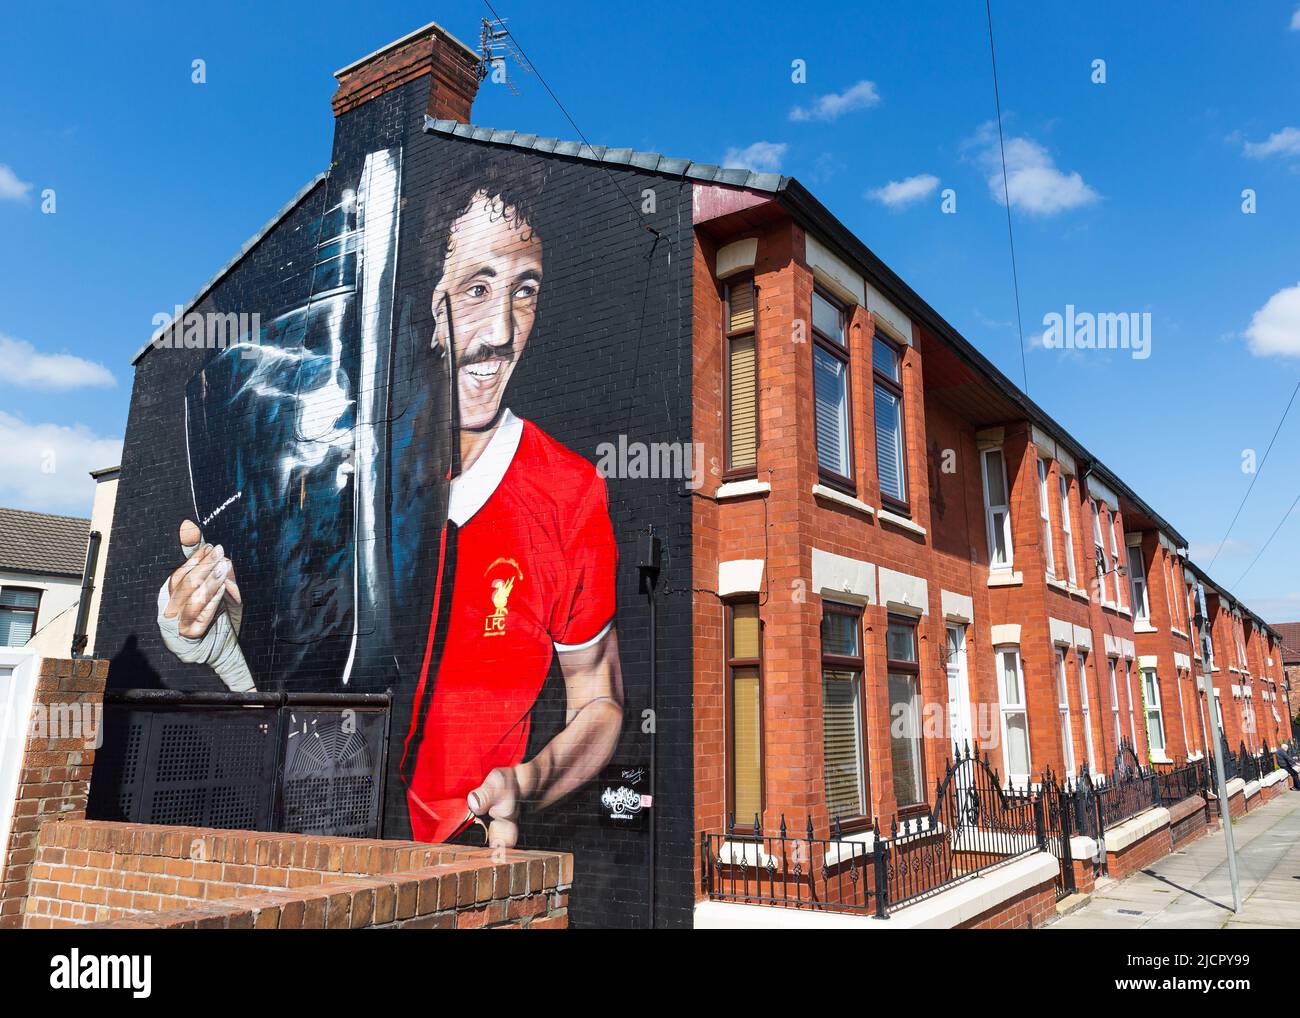 Mural of Alan Kennedy holding the 1981 European Cup, Liverpool FC street art, Anfield, Liverpool, England, UK Stock Photo